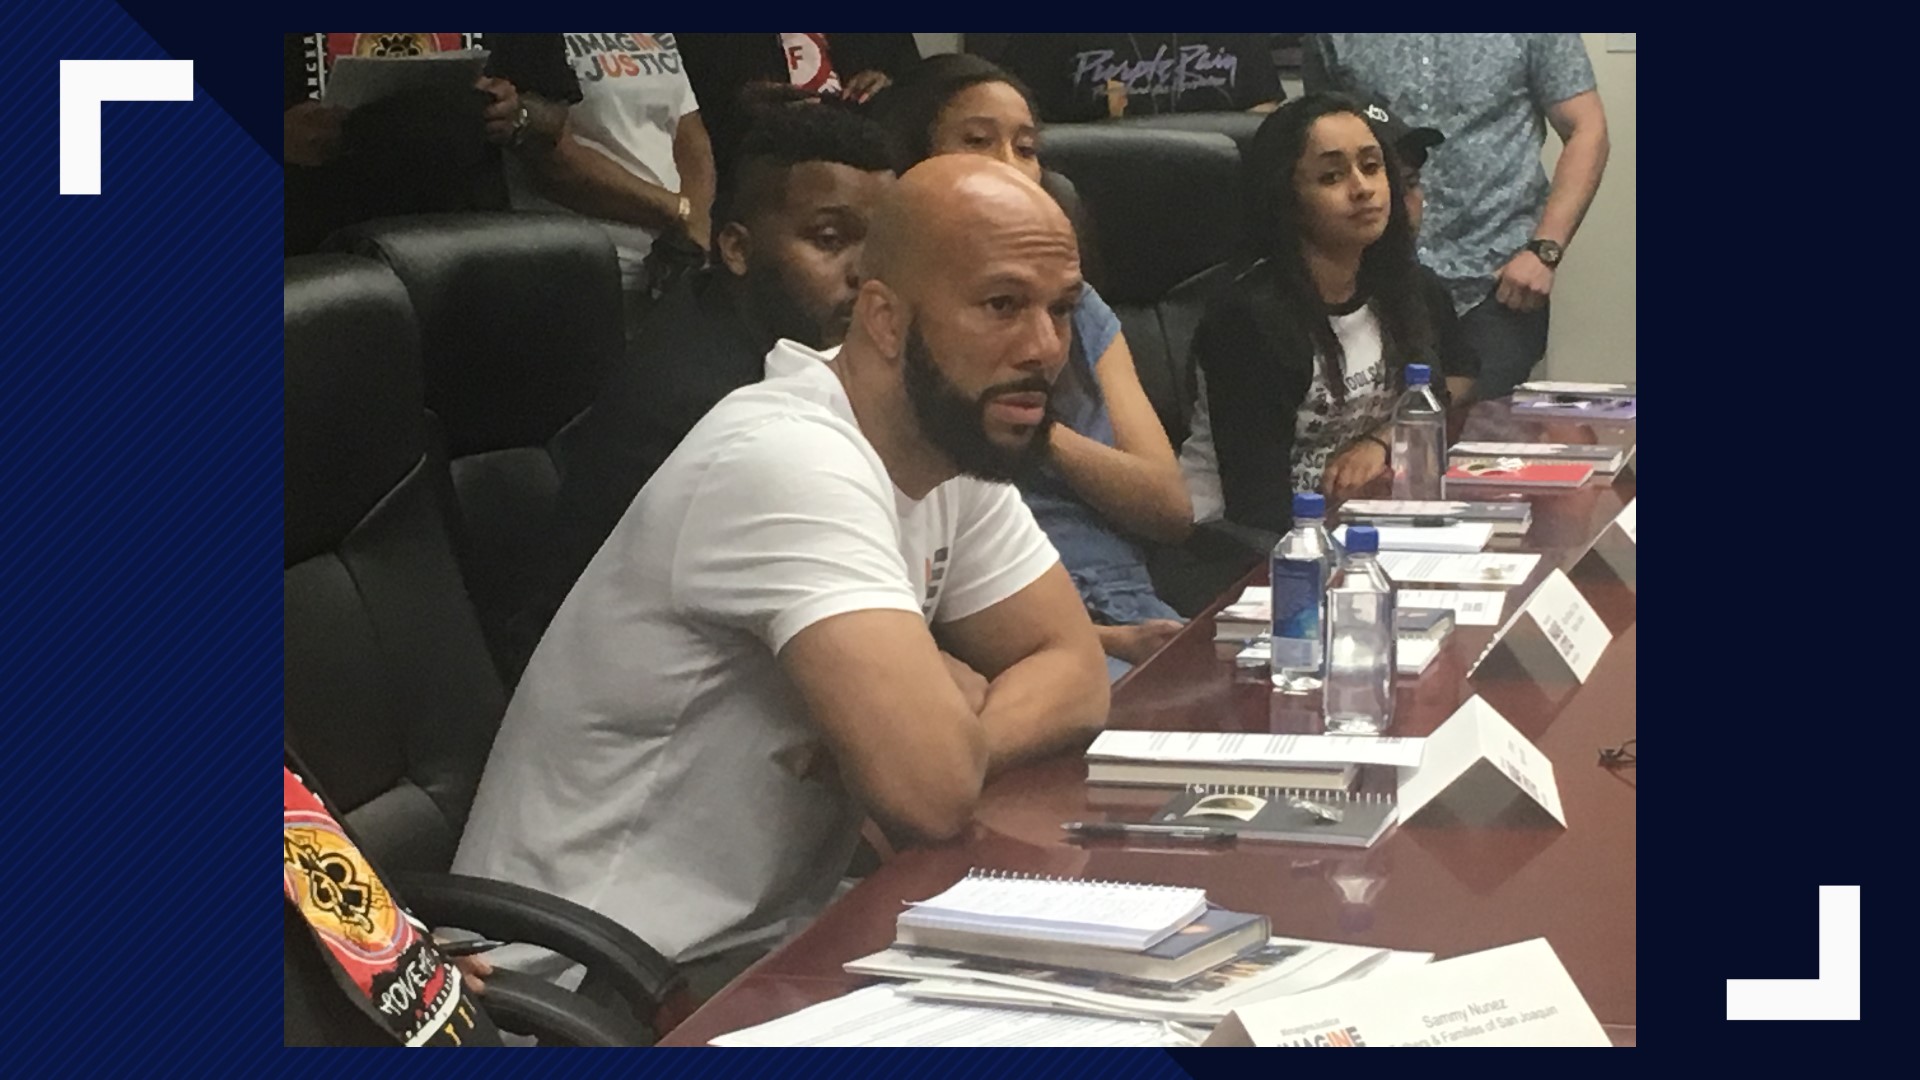 In a packed conference room at Stockton City Hall, actor, rapper, activist Common was the star attraction, greeted by a round of applause. But he didn’t come to give a speech, but rather listen to community activists trying to re-shape the city that has a reputation for crime to one of reform and hope.